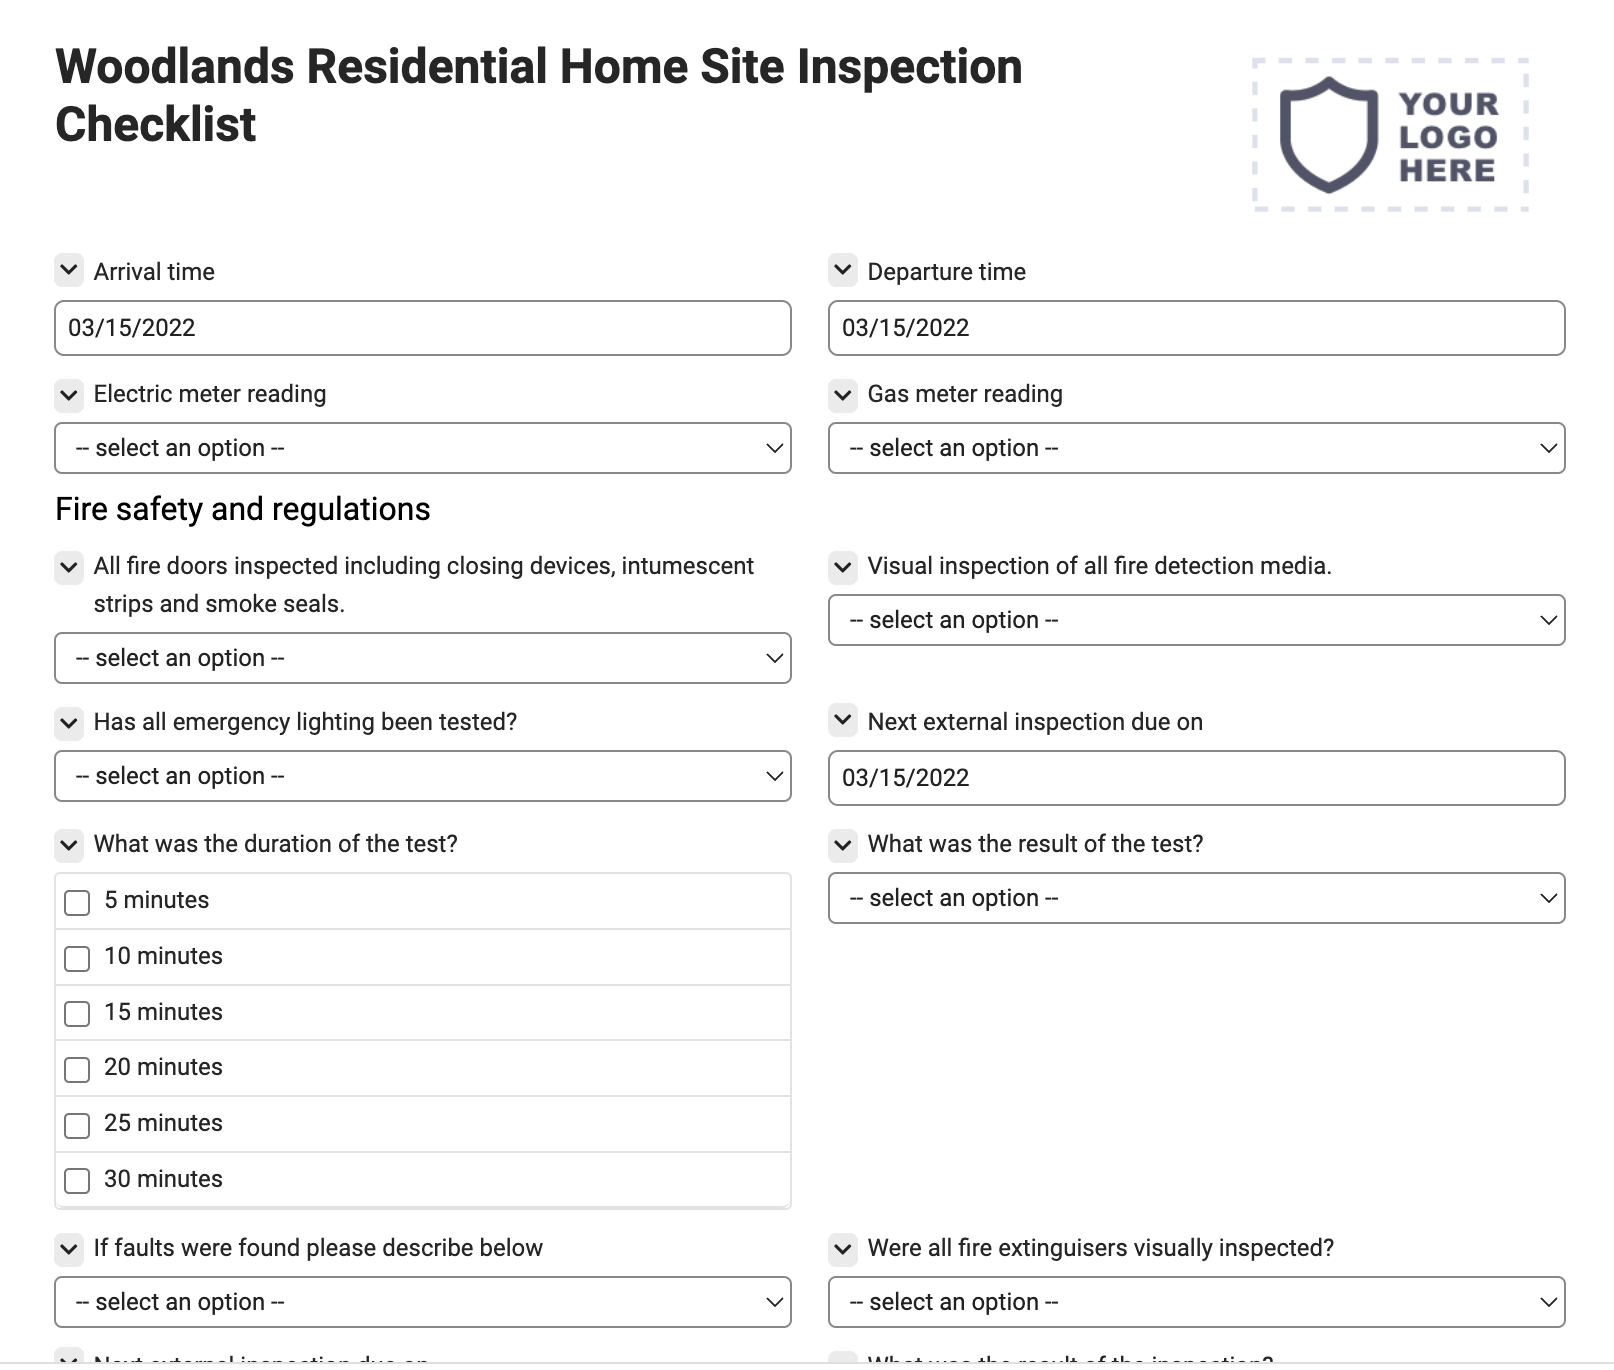 Woodlands Residential Home Site Inspection Checklist